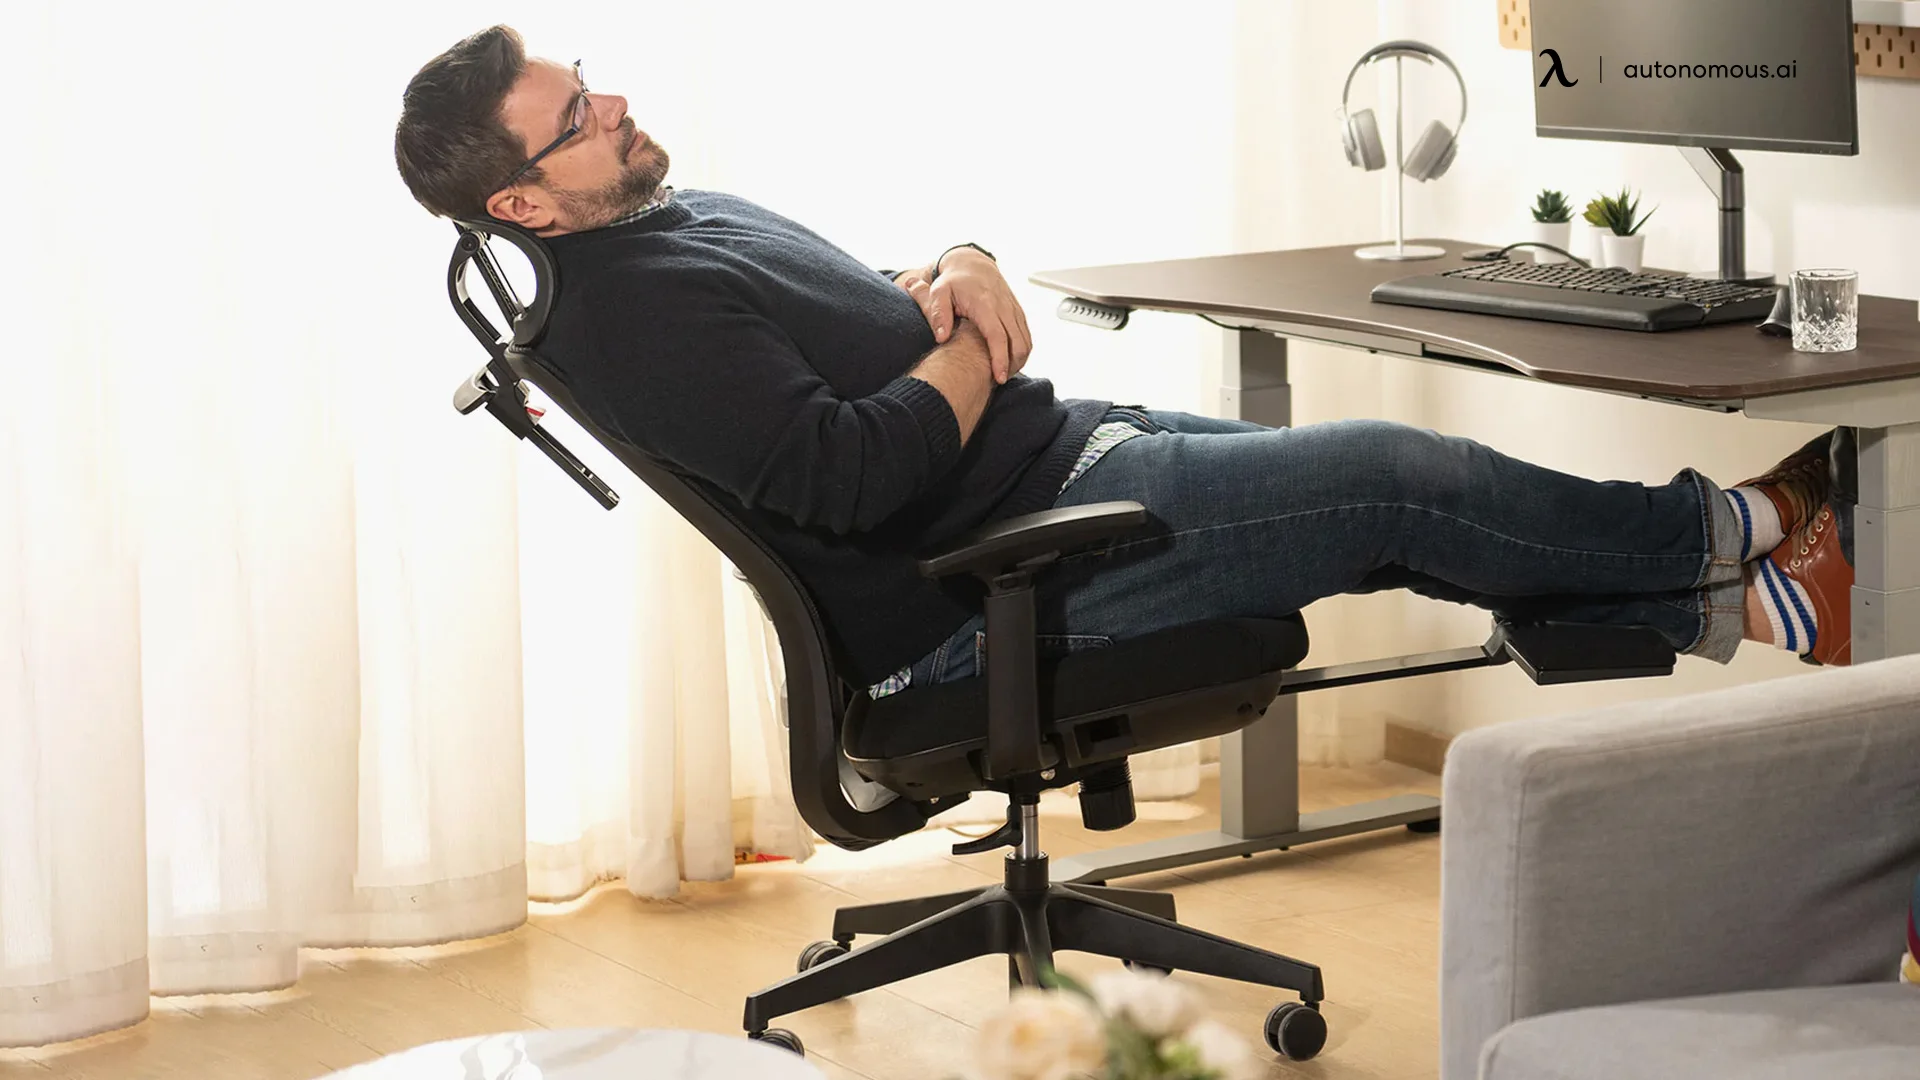 Do Your Research Before Purchasing a Fabric Office Chair